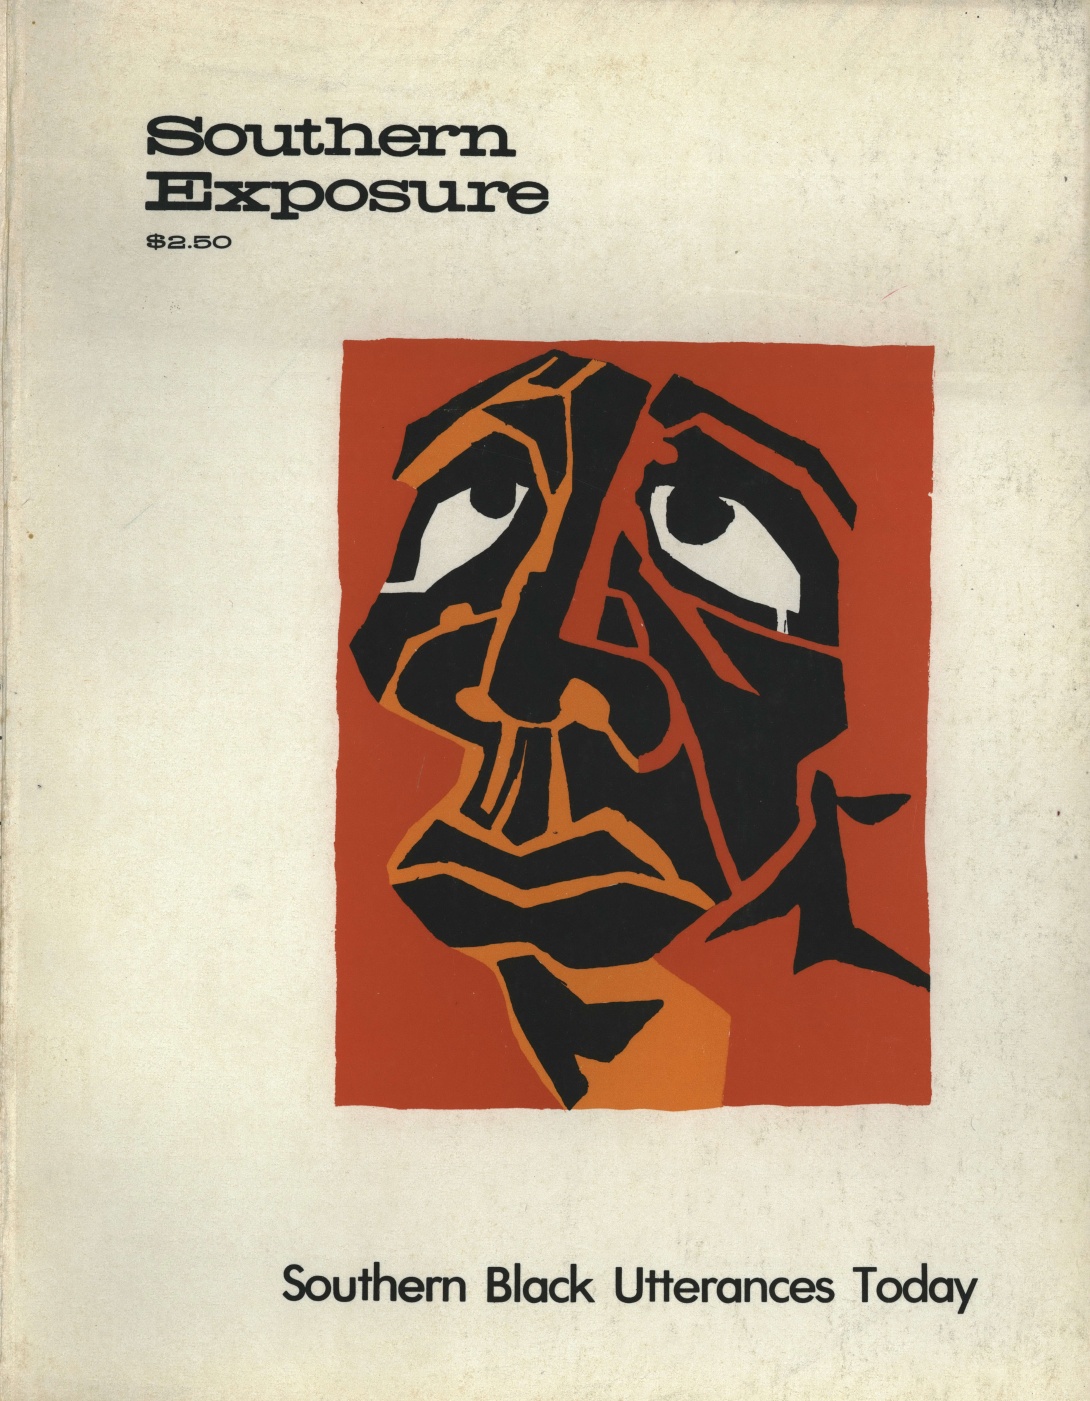 Cover for Southern Exposure's Southern Black Utterances Today cover featuring a woodcut print of a Black man's face gazing upward, by Atlanta artist Lucious Hightower